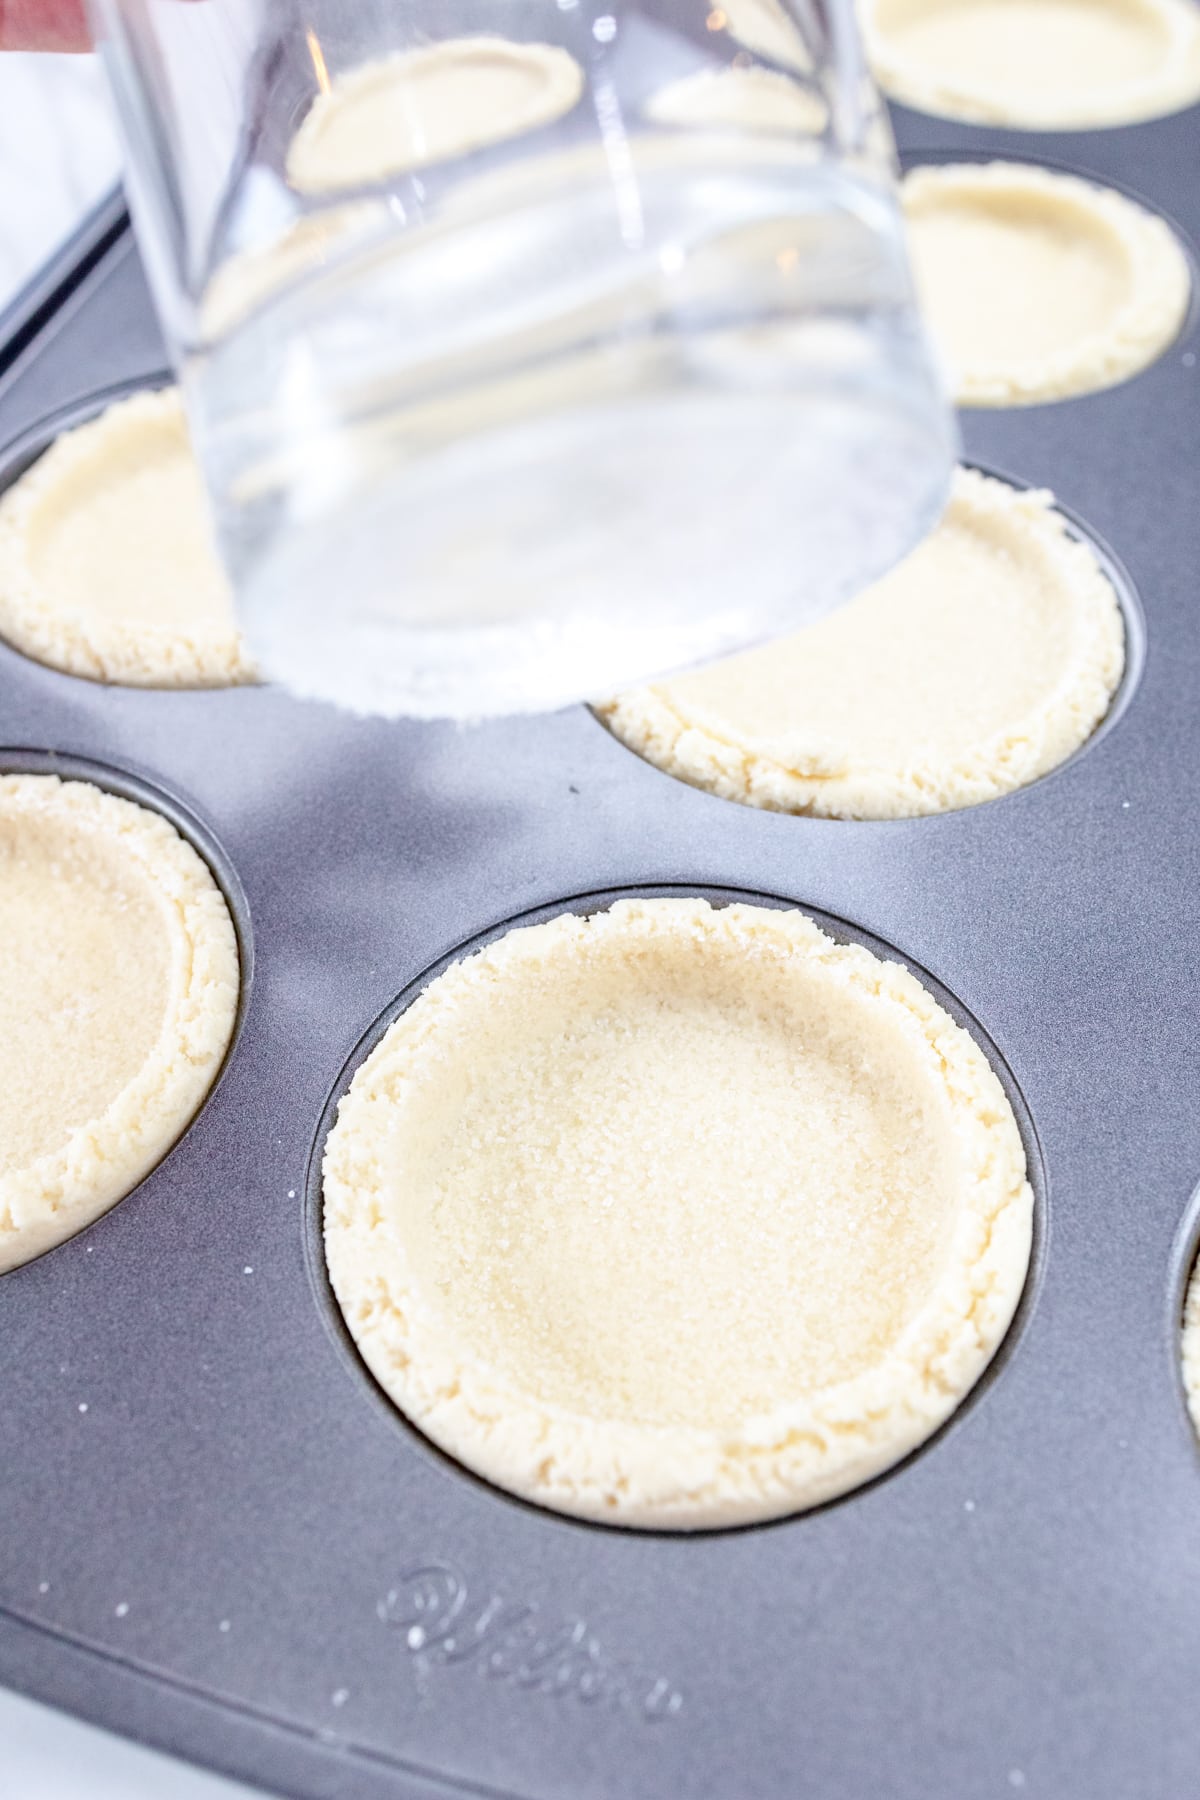 Close up of the bottom of a glass that has been dipped in sugar, being lifted from having just pressed the cookie dough down flat into the muffin top pan.